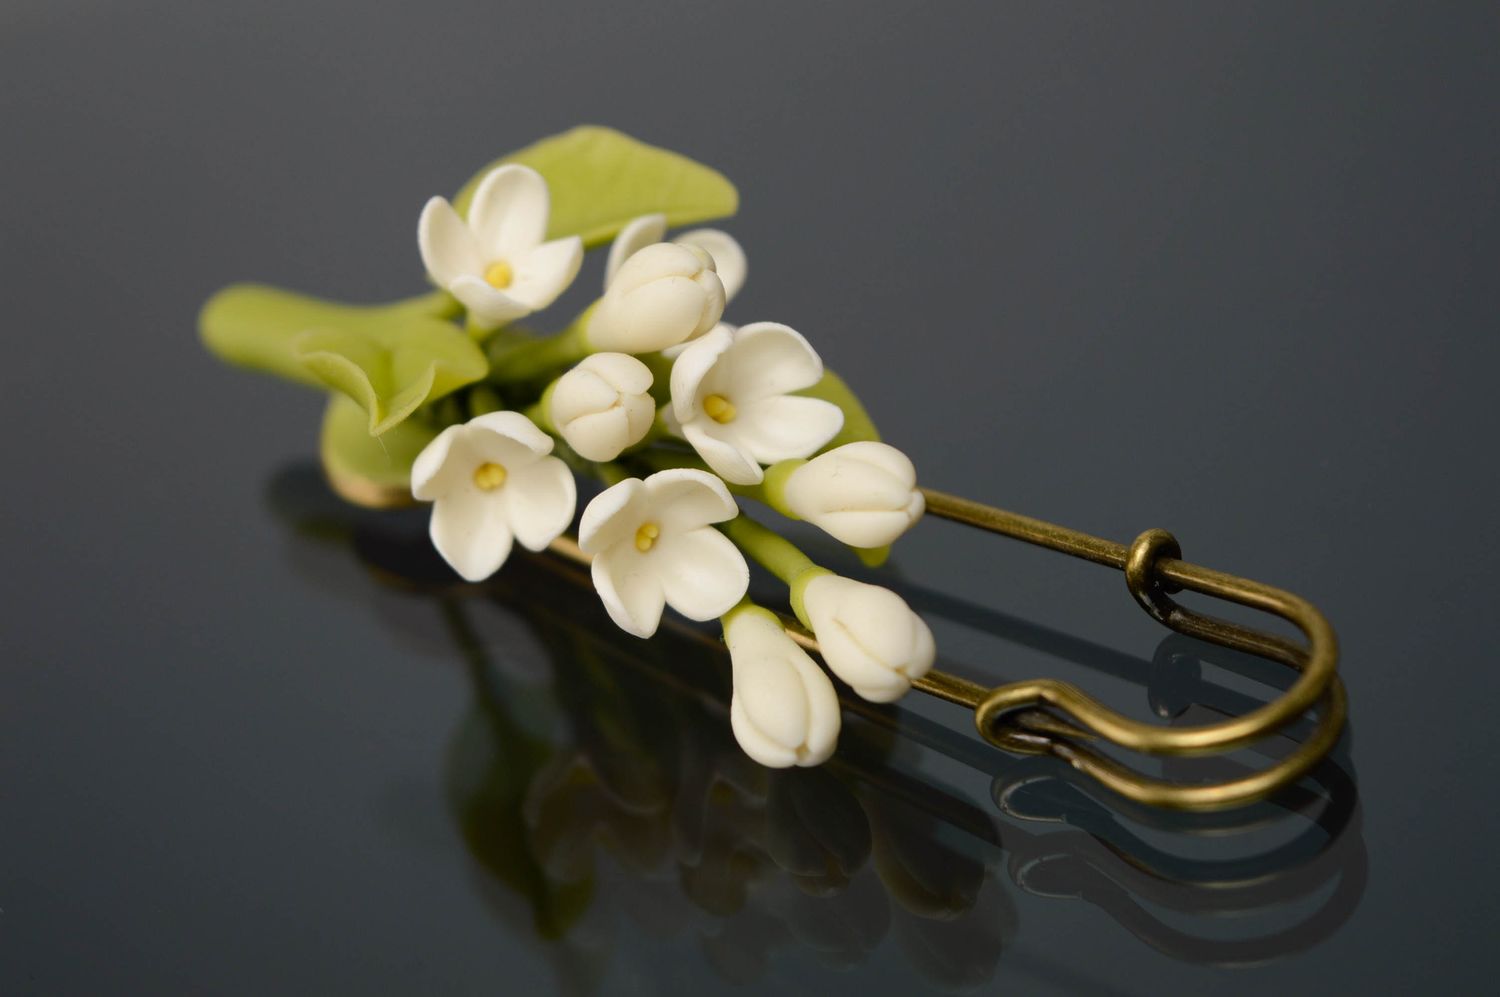 Metal brooch with cold porcelain flowers photo 1